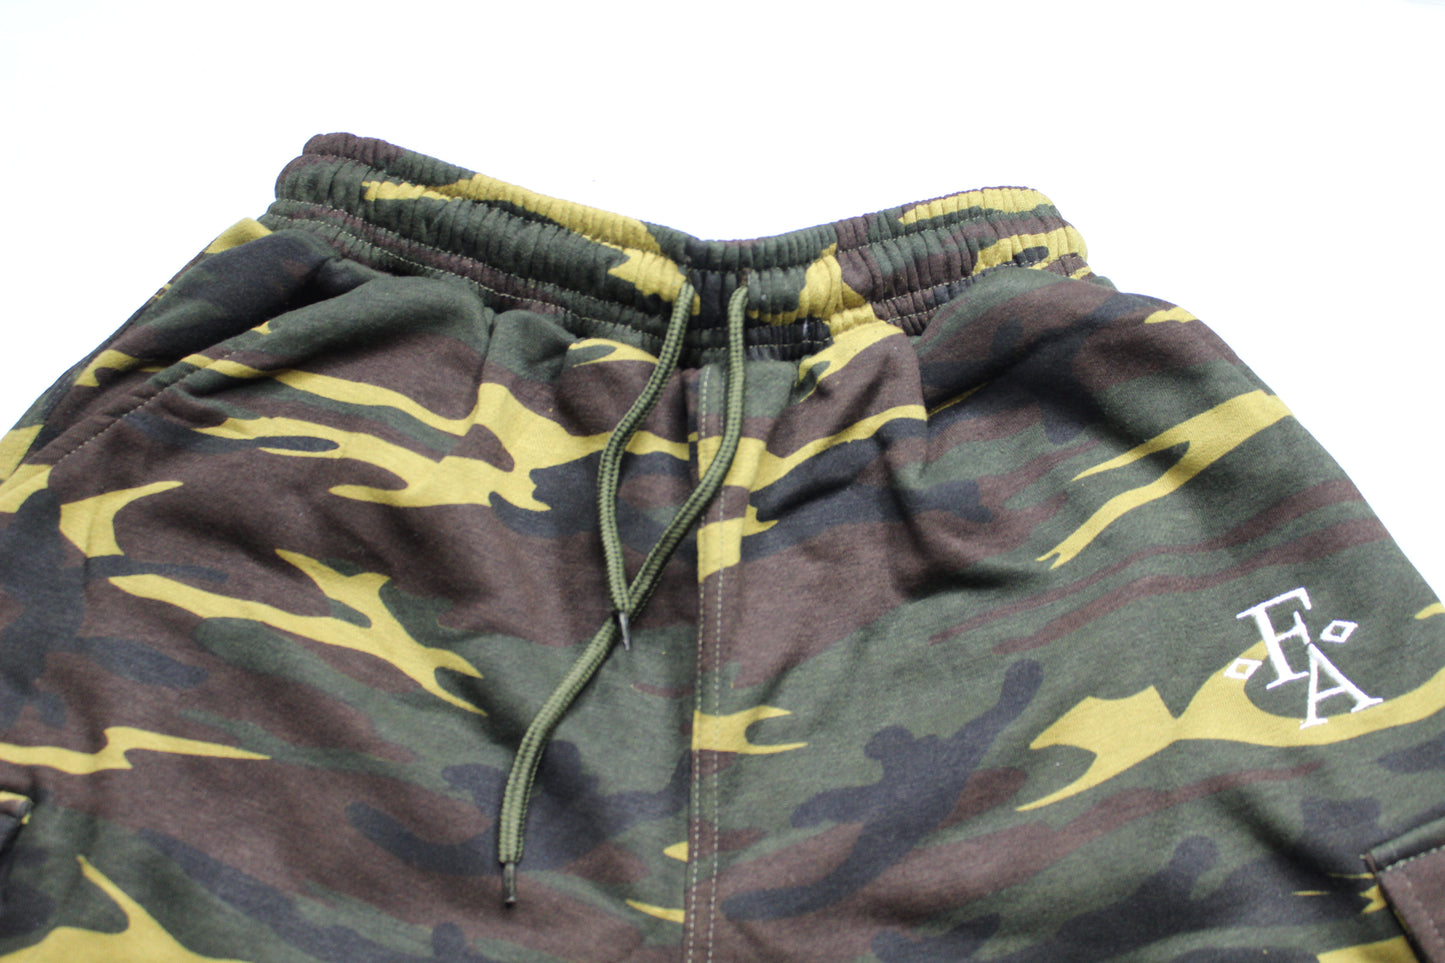 Classic Fit Camouflage Cotton Embroidered Cargo Shorts.